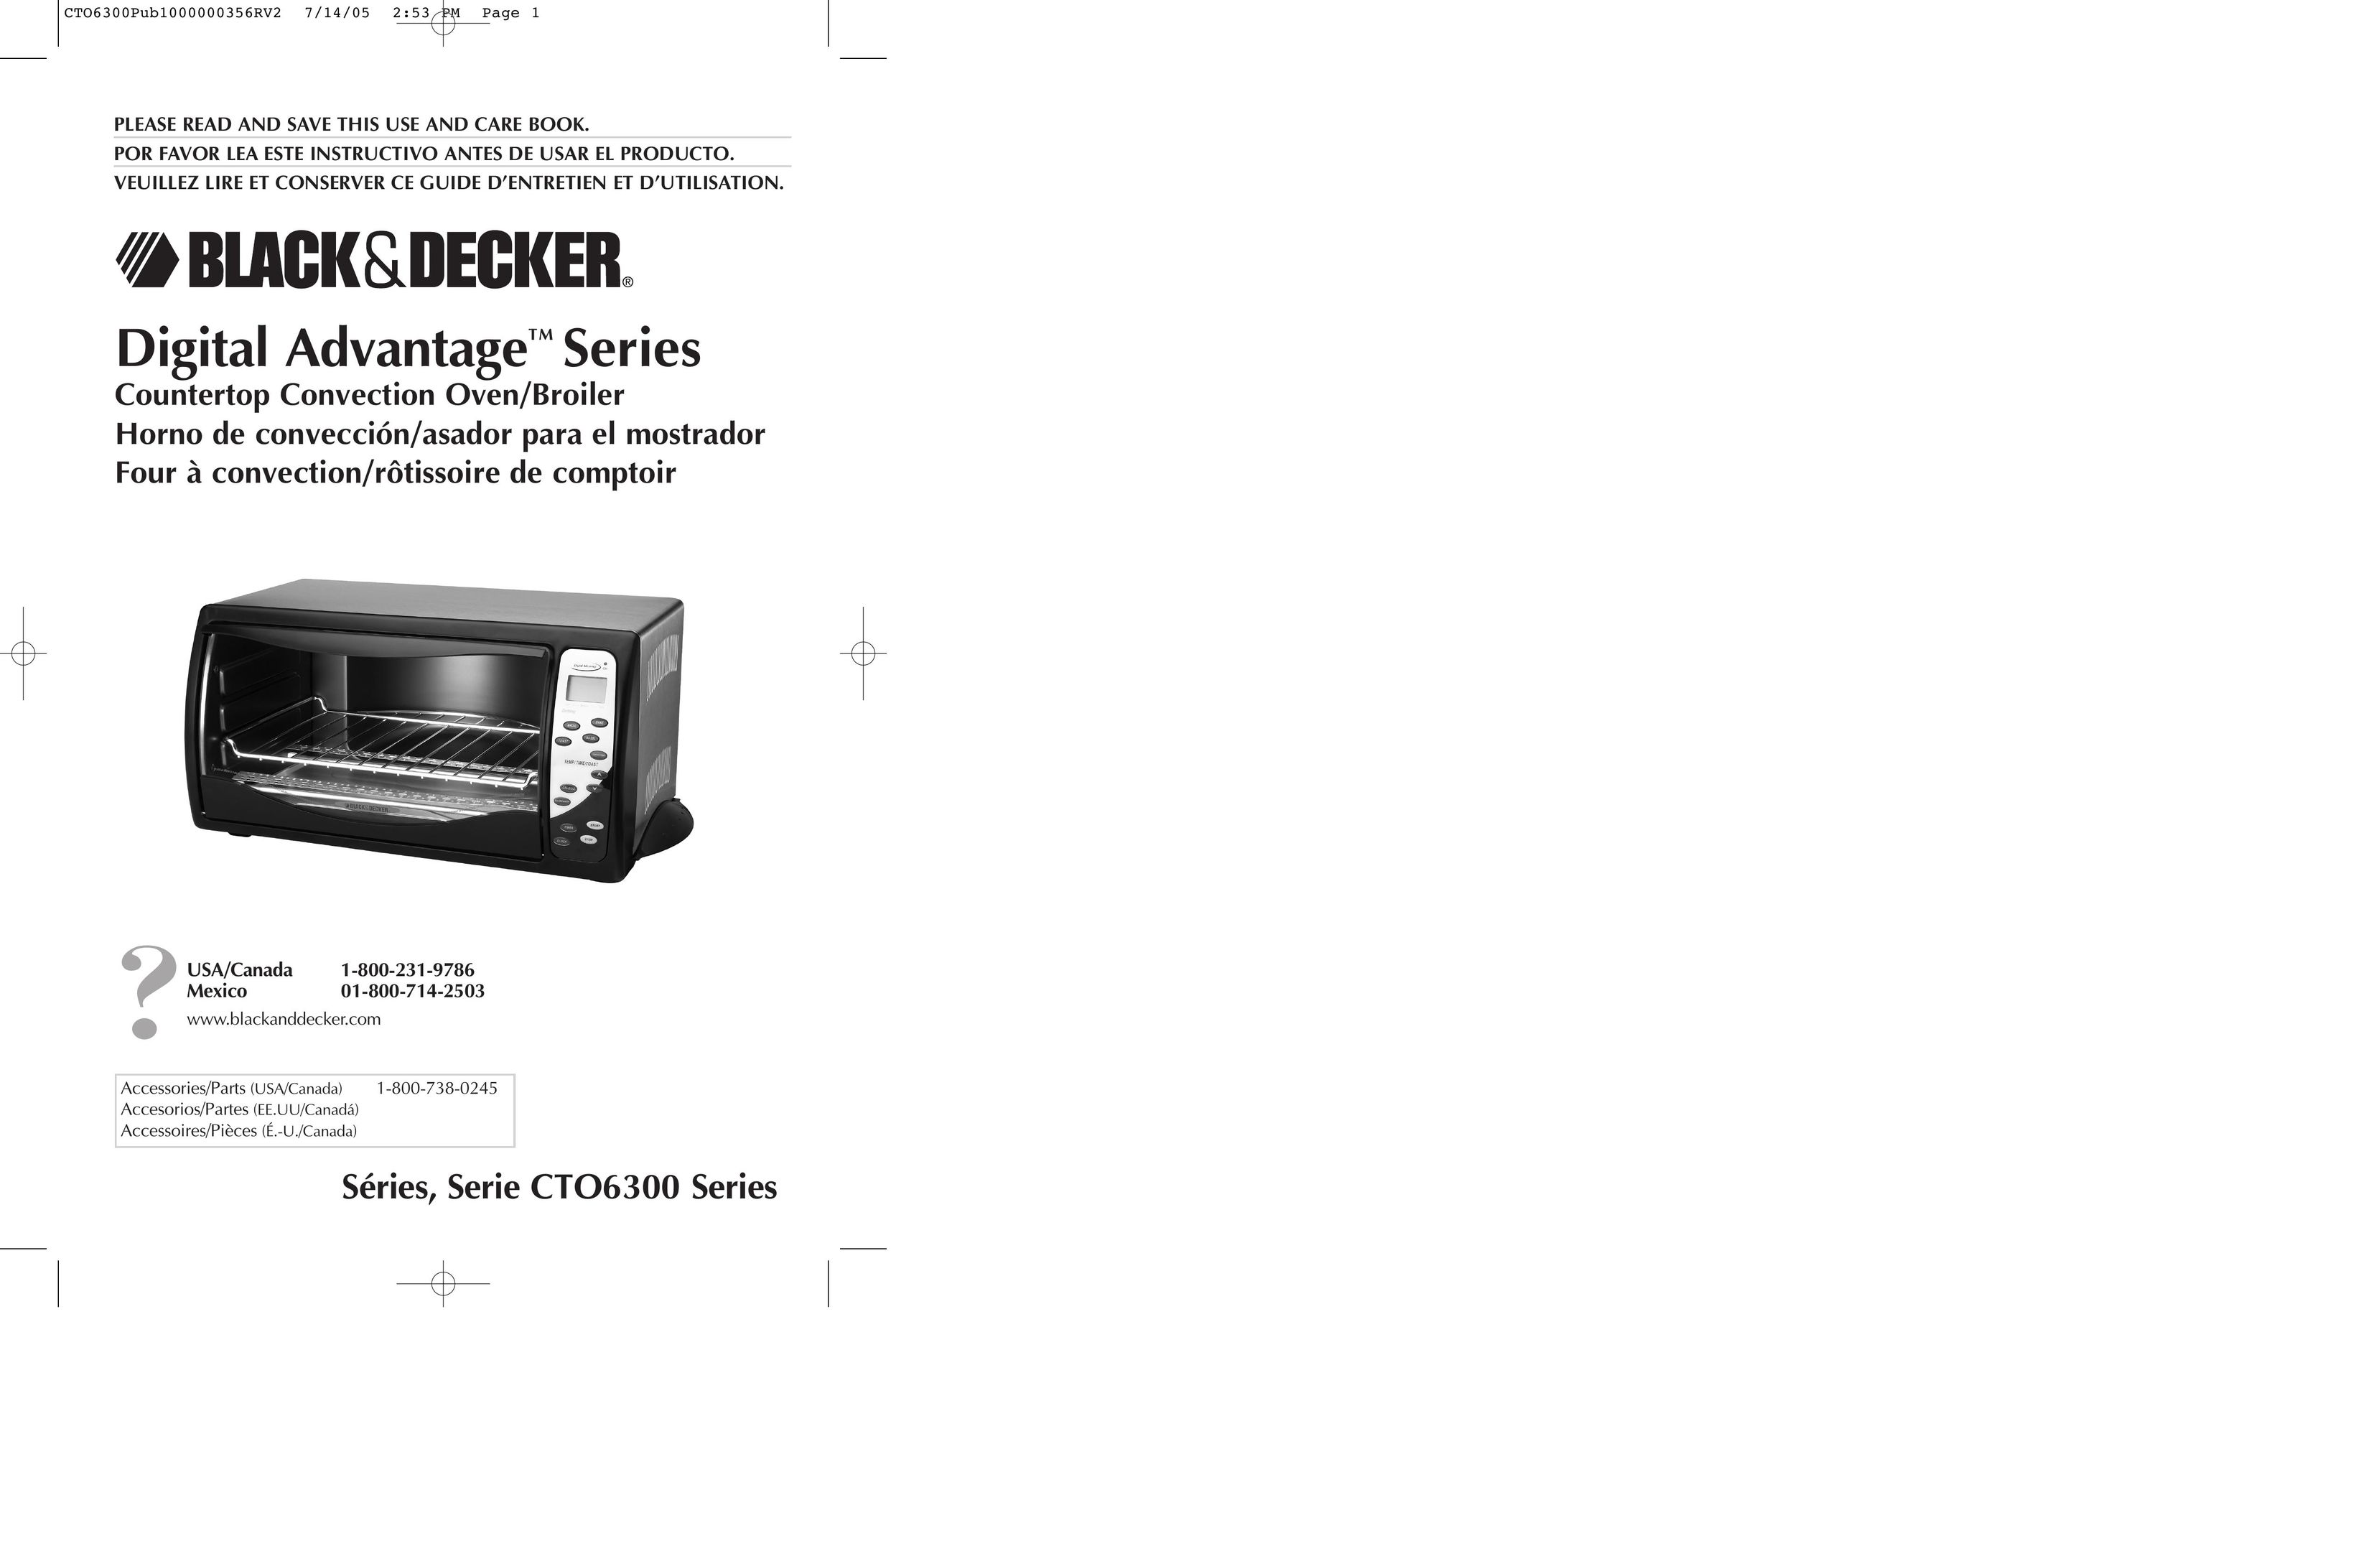 Black & Decker TO6300 Series Convection Oven User Manual